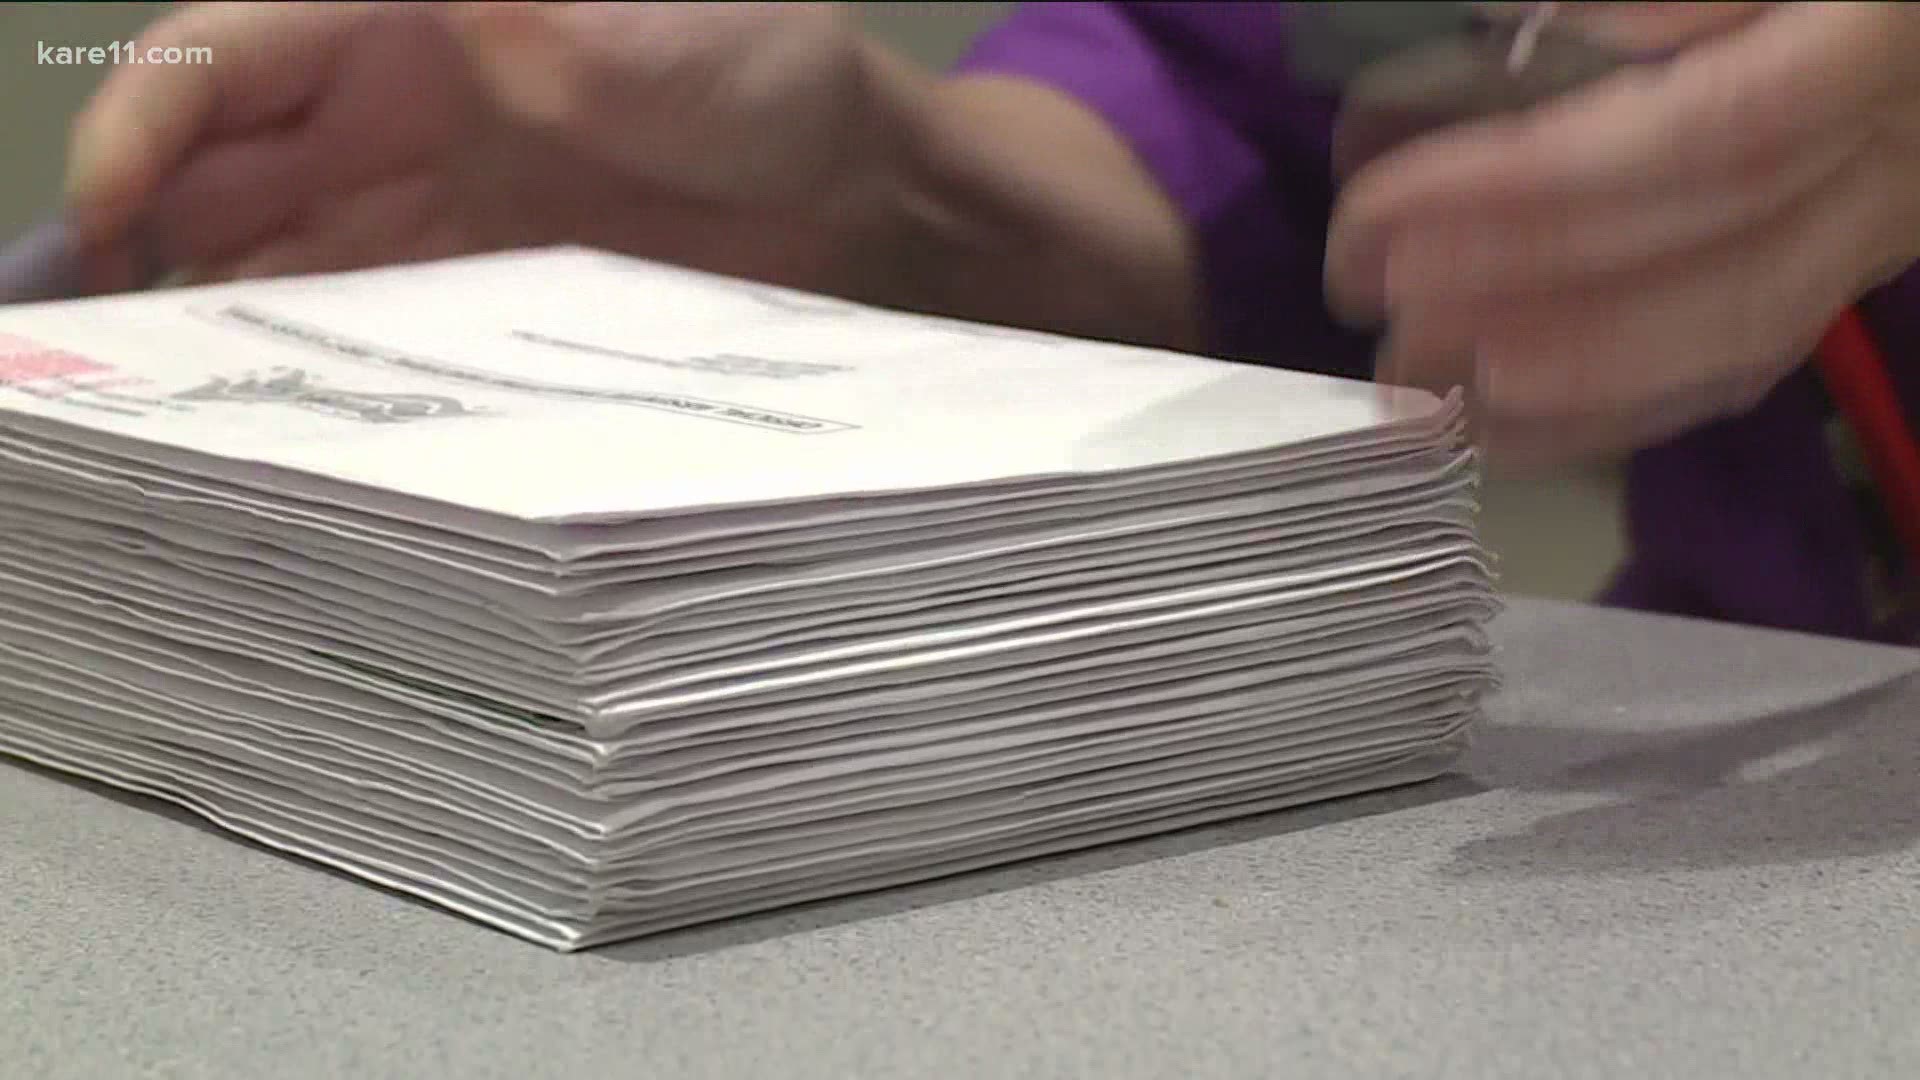 The ruling casts doubt on whether absentee ballots received after Nov. 3 will be counted.